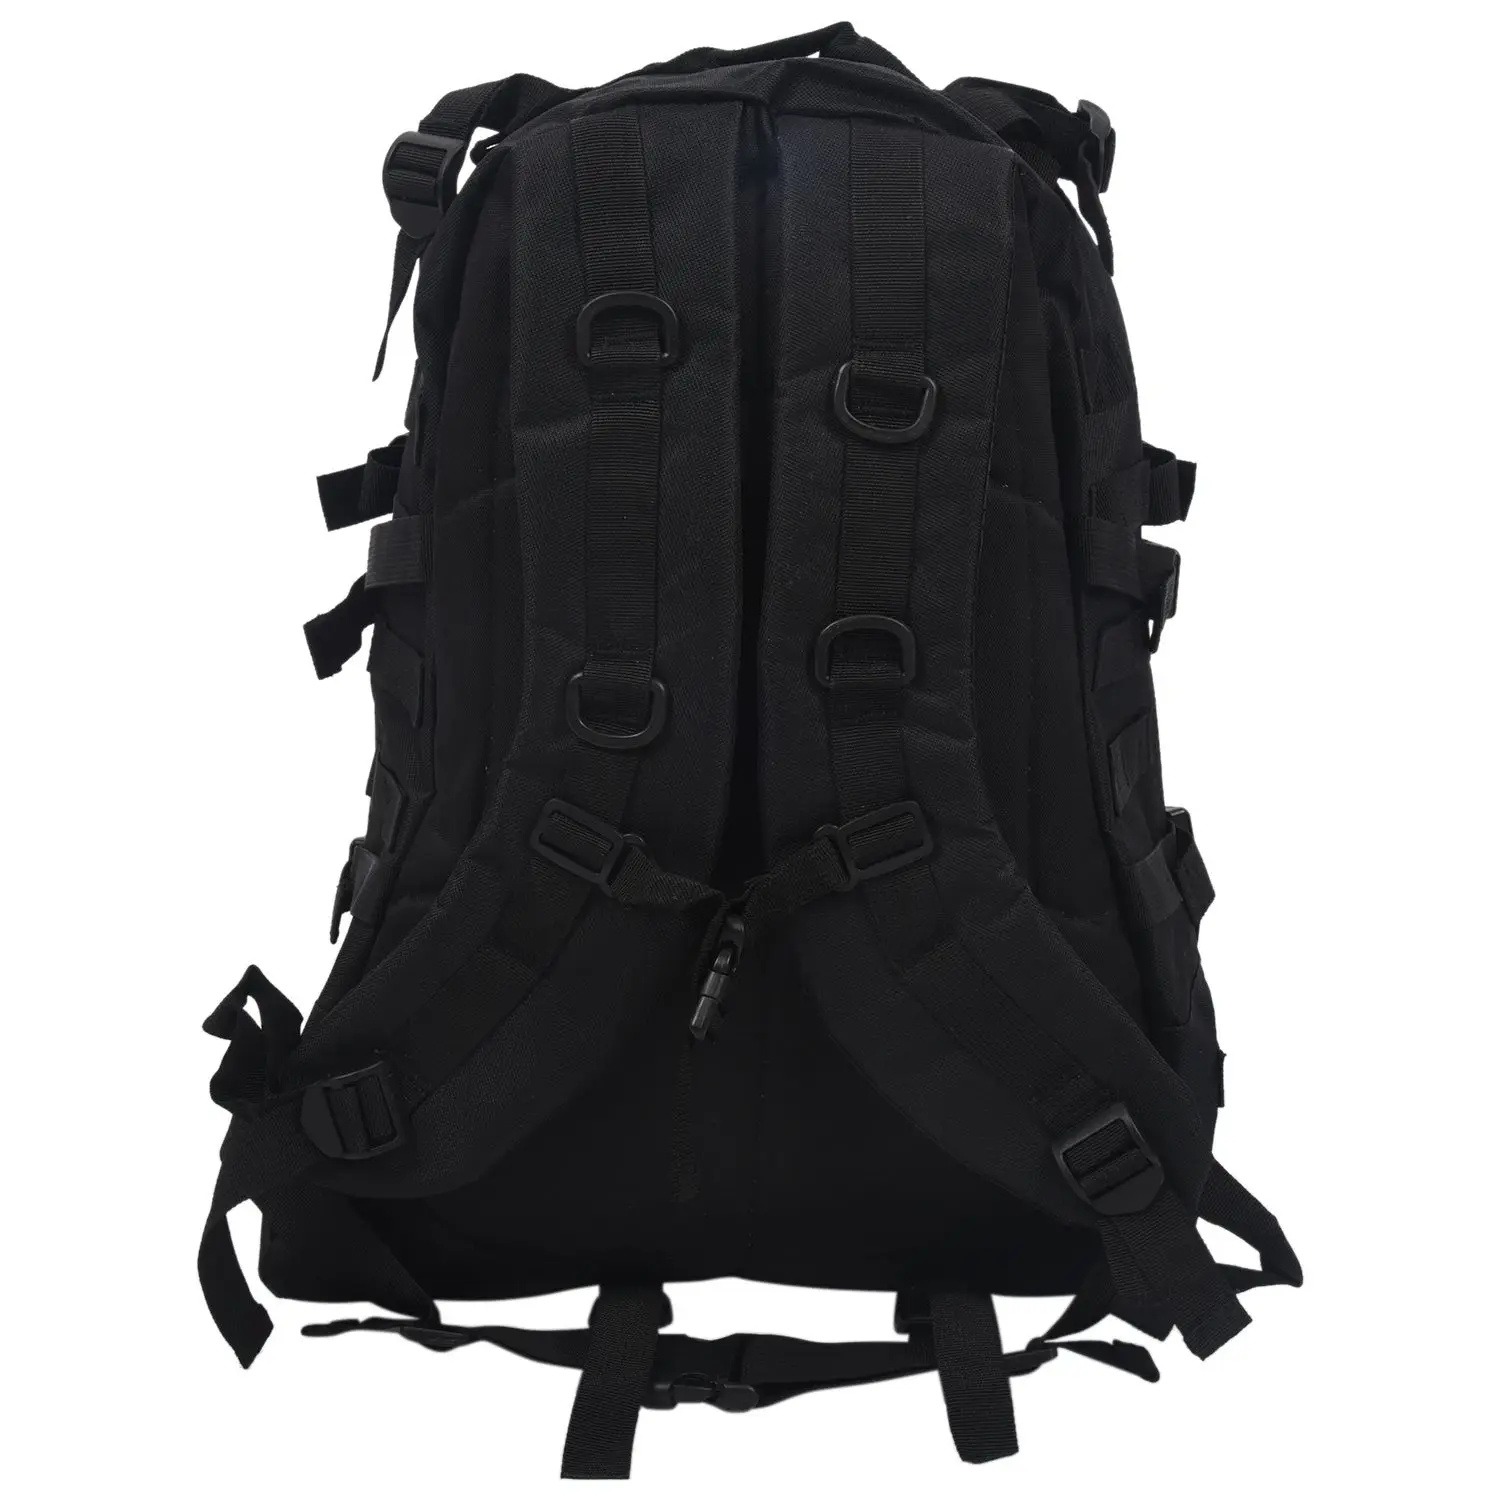 

Outdoor 40L 600D Waterproof Oxford Cloth Military Rucksack Backpack Bag ACU Camouflage Sports Travelling Hiking Bag Black